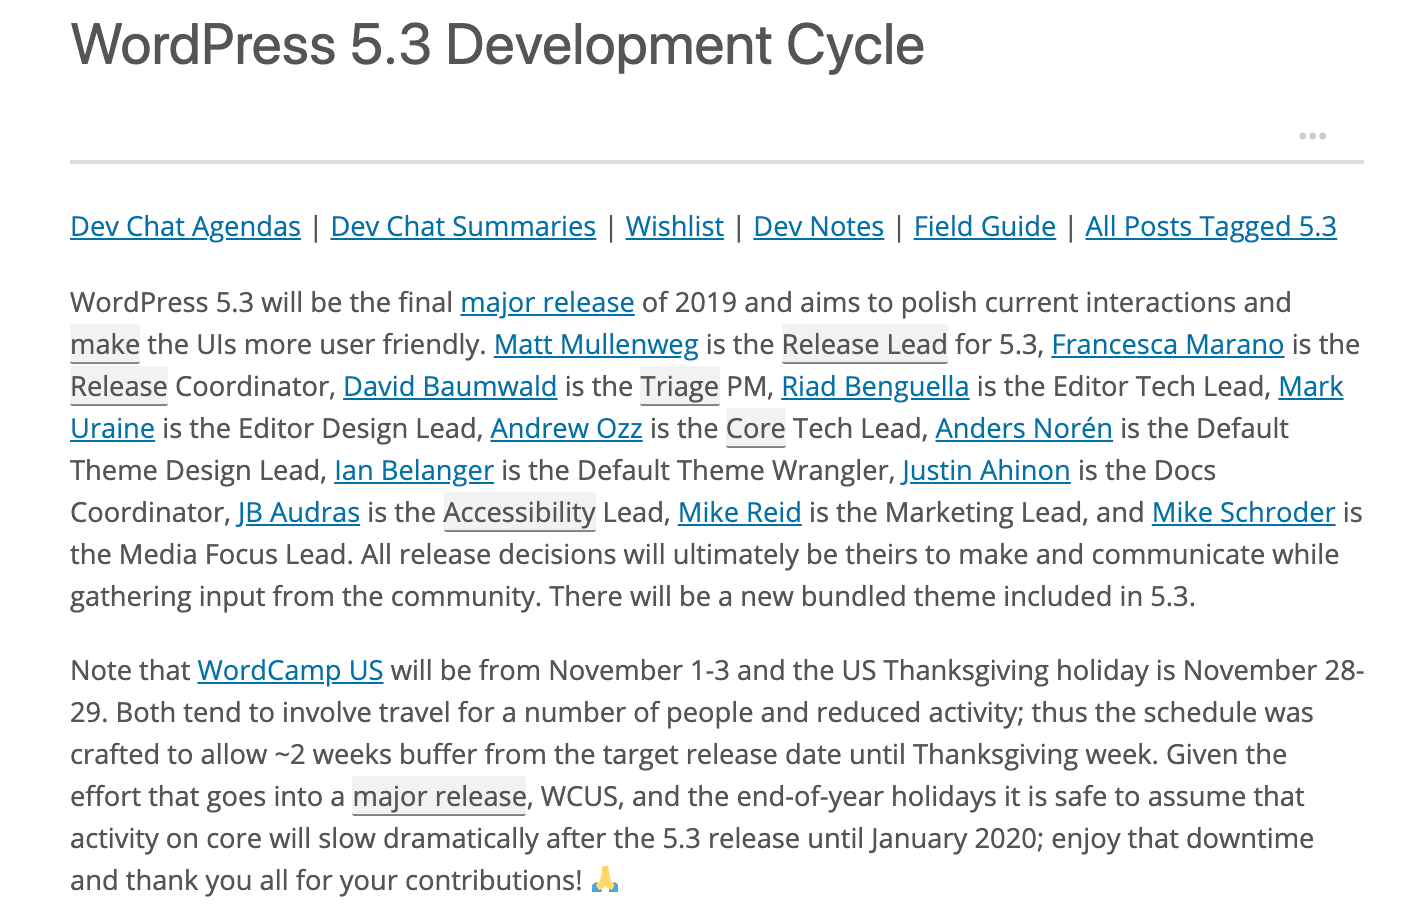 Screenshot of the WordPress 5.3 Development Cycle Page with the names of the squad